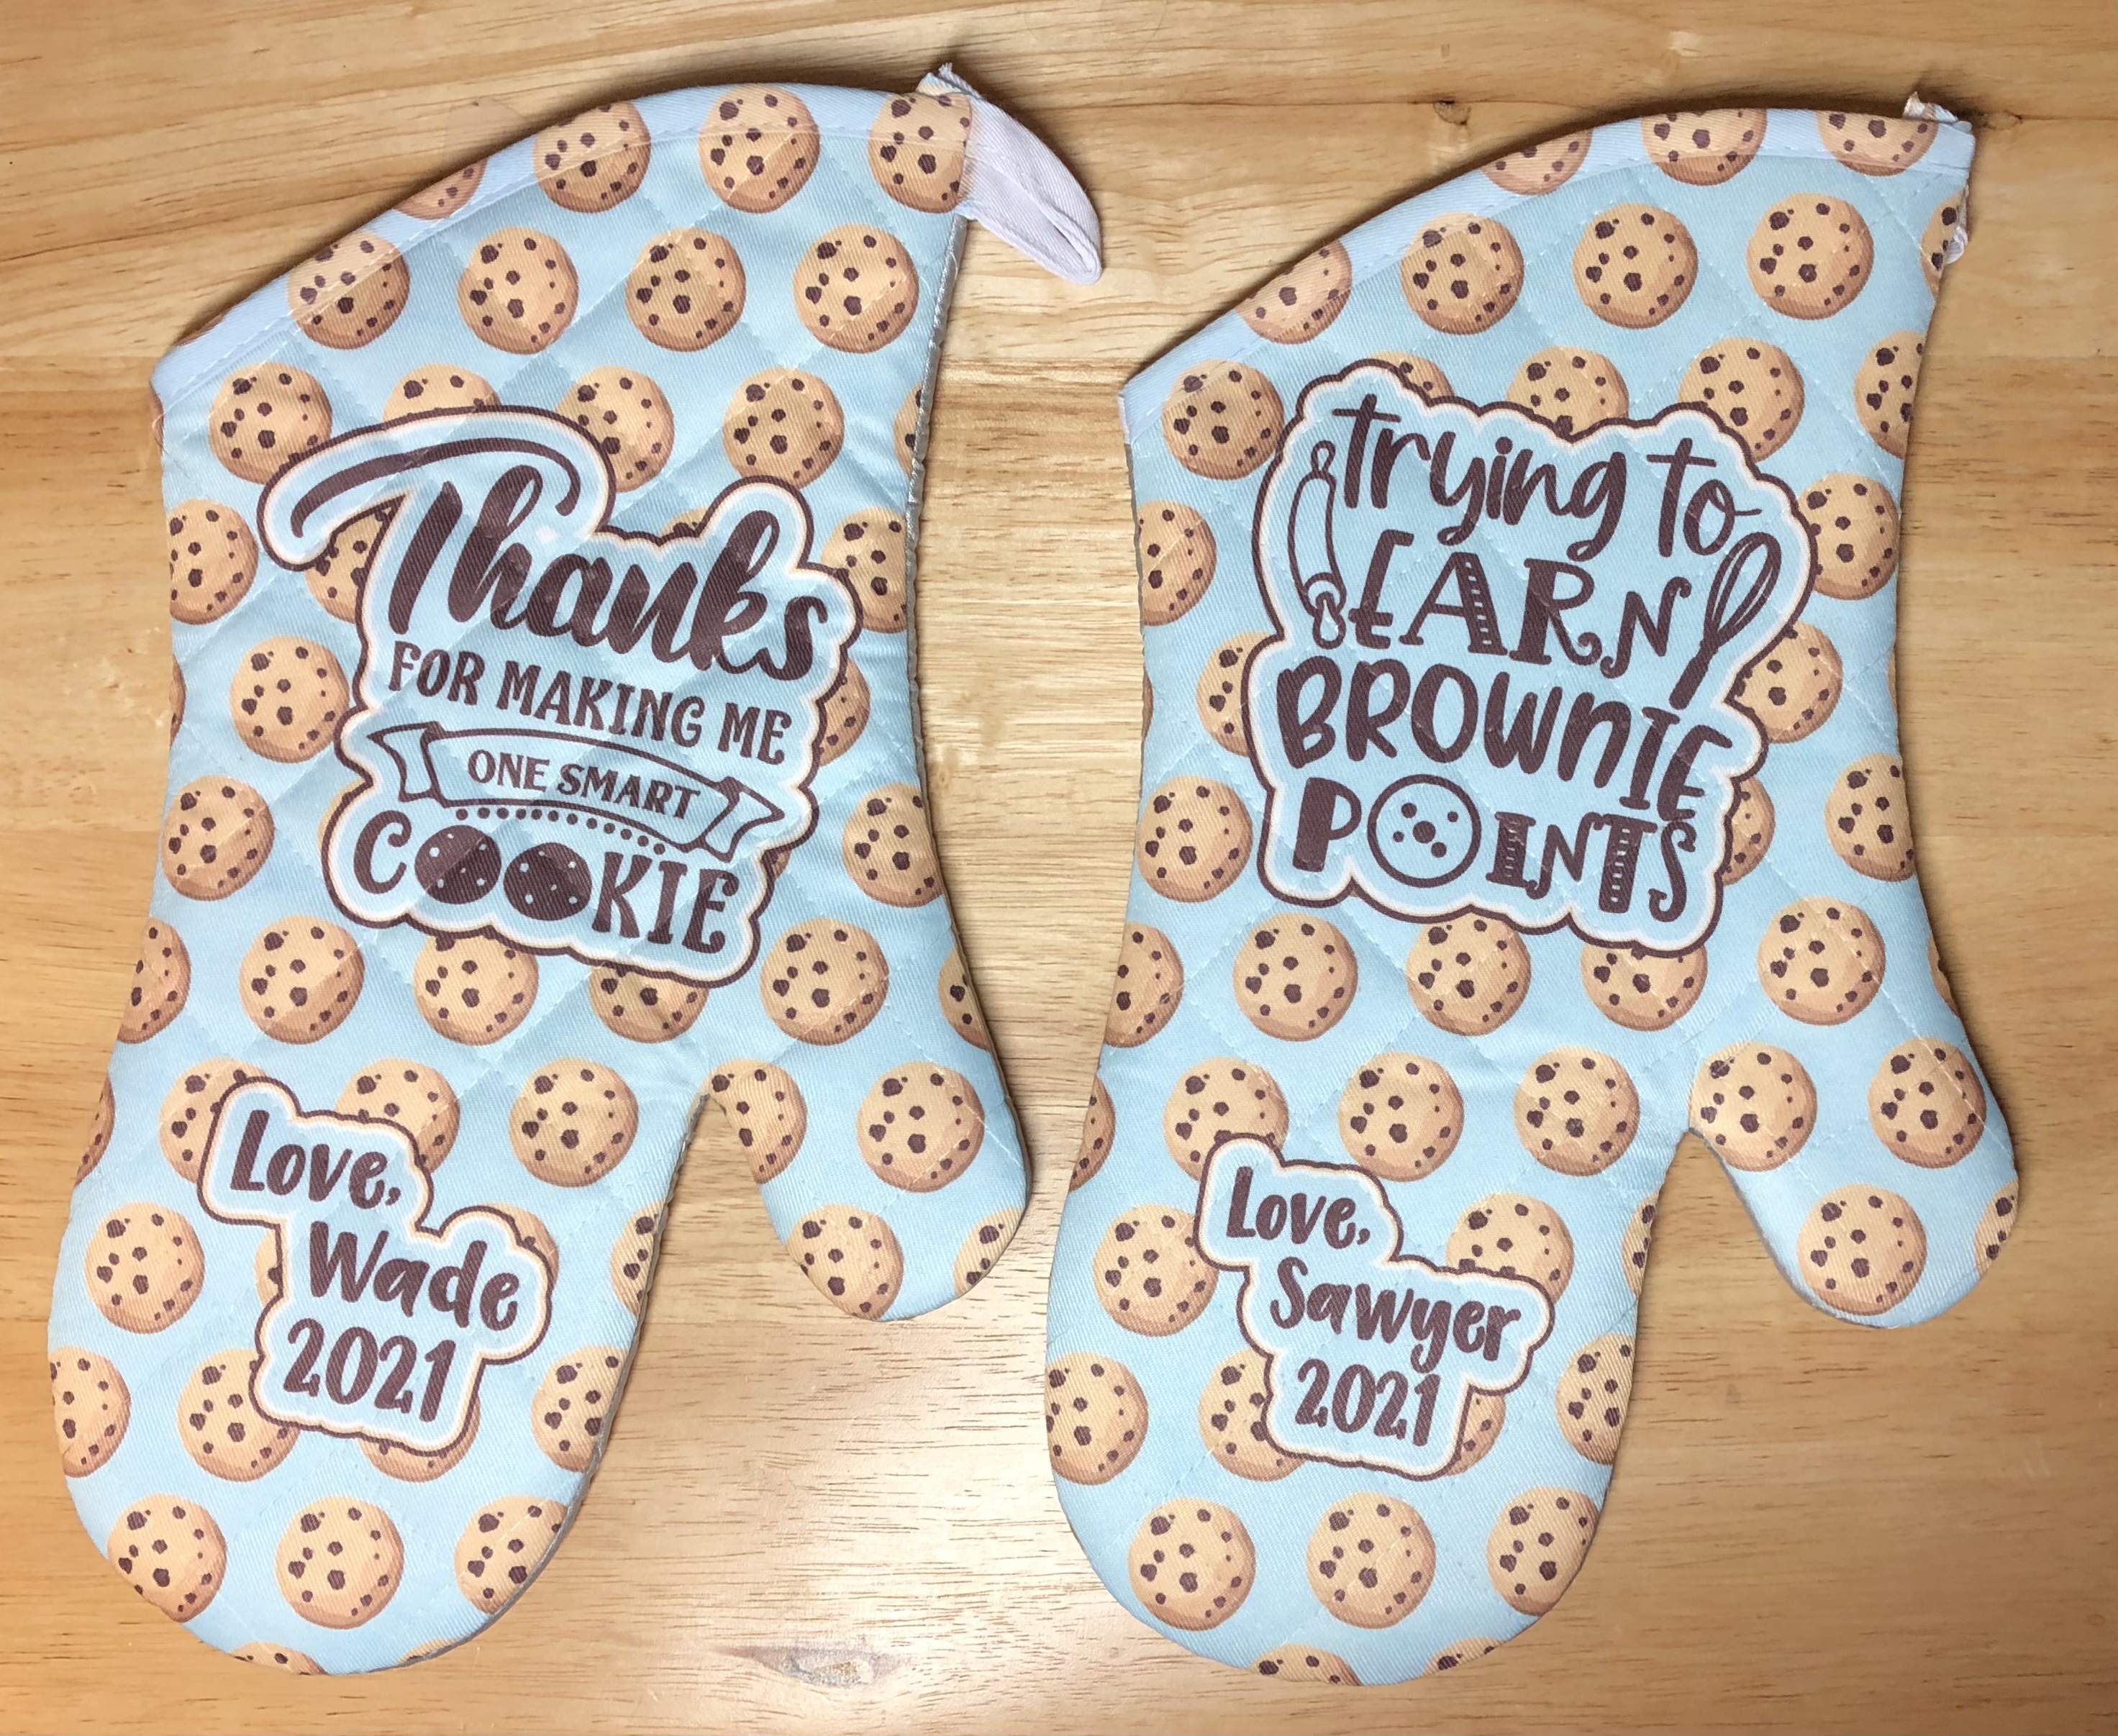 Custom oven mitts created for Teacher appreciation week!